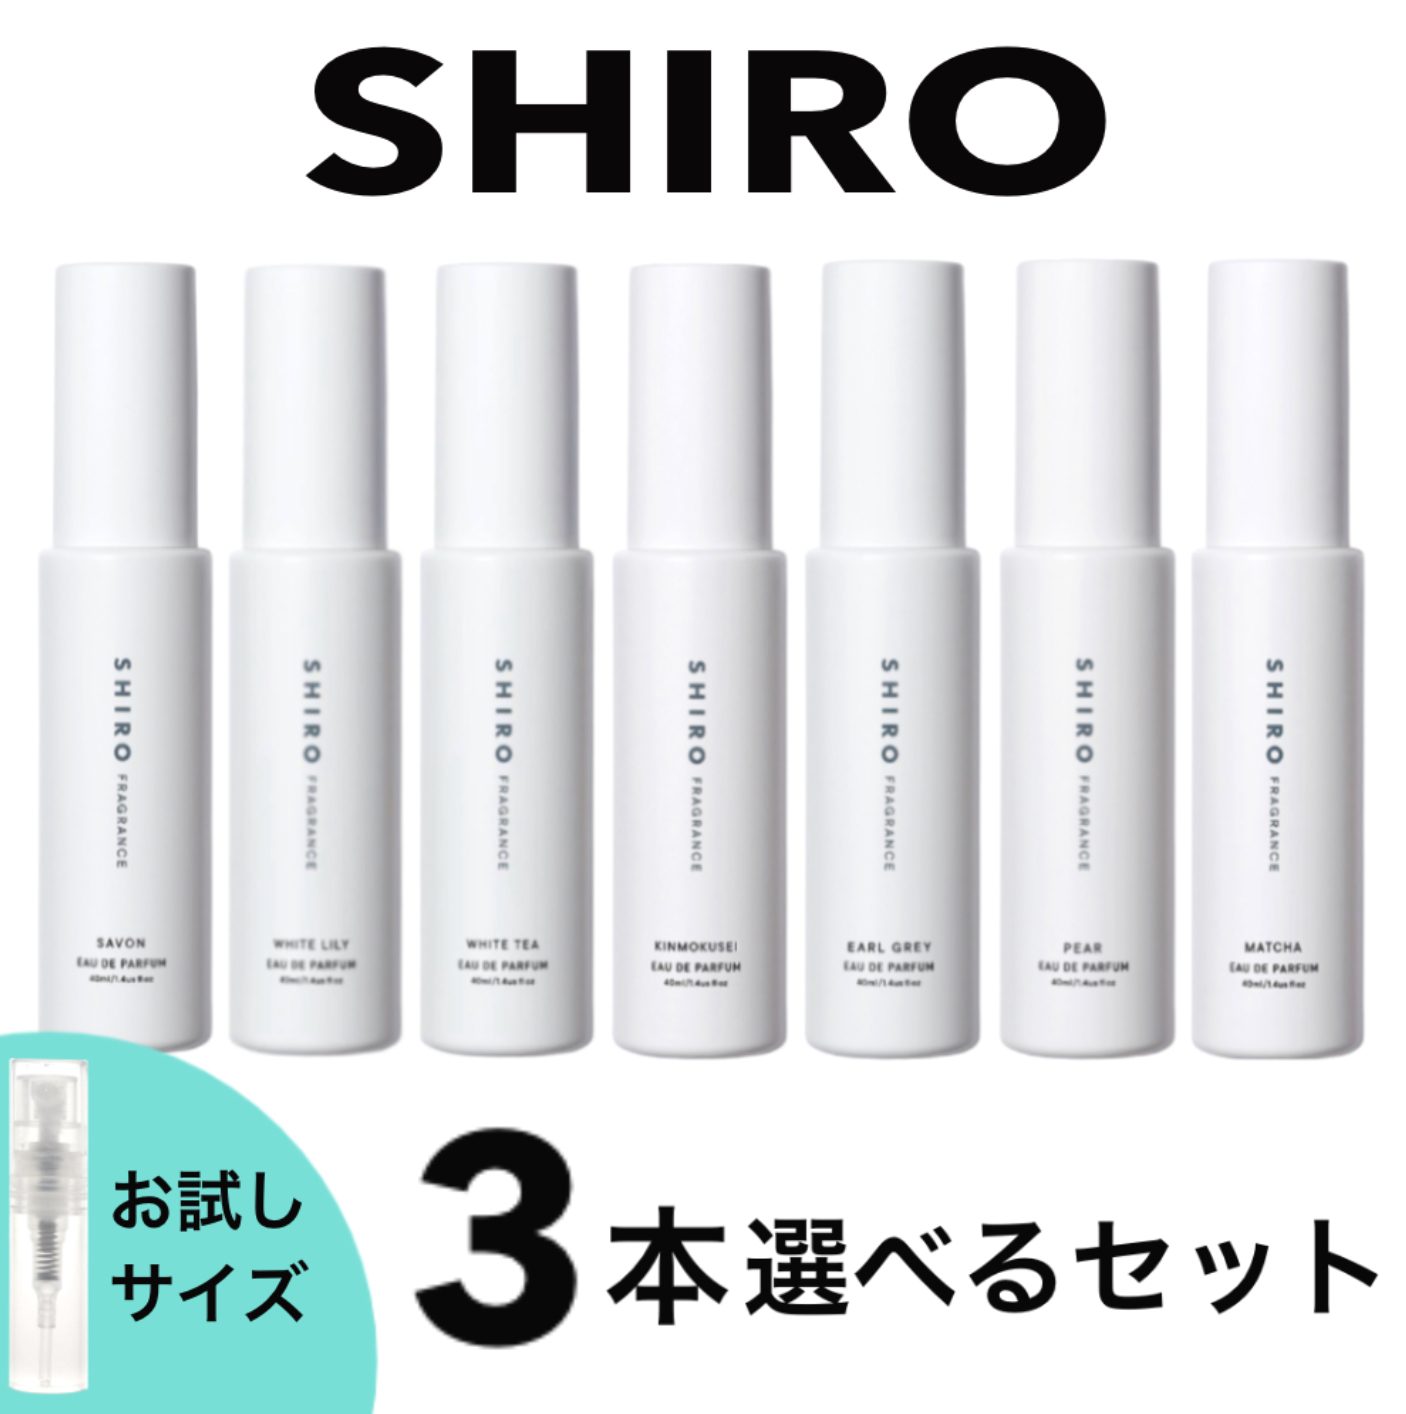 shiro white o-do Pal fan perfume trial is possible to choose 3 pcs set popular lady's men's unisex natural 